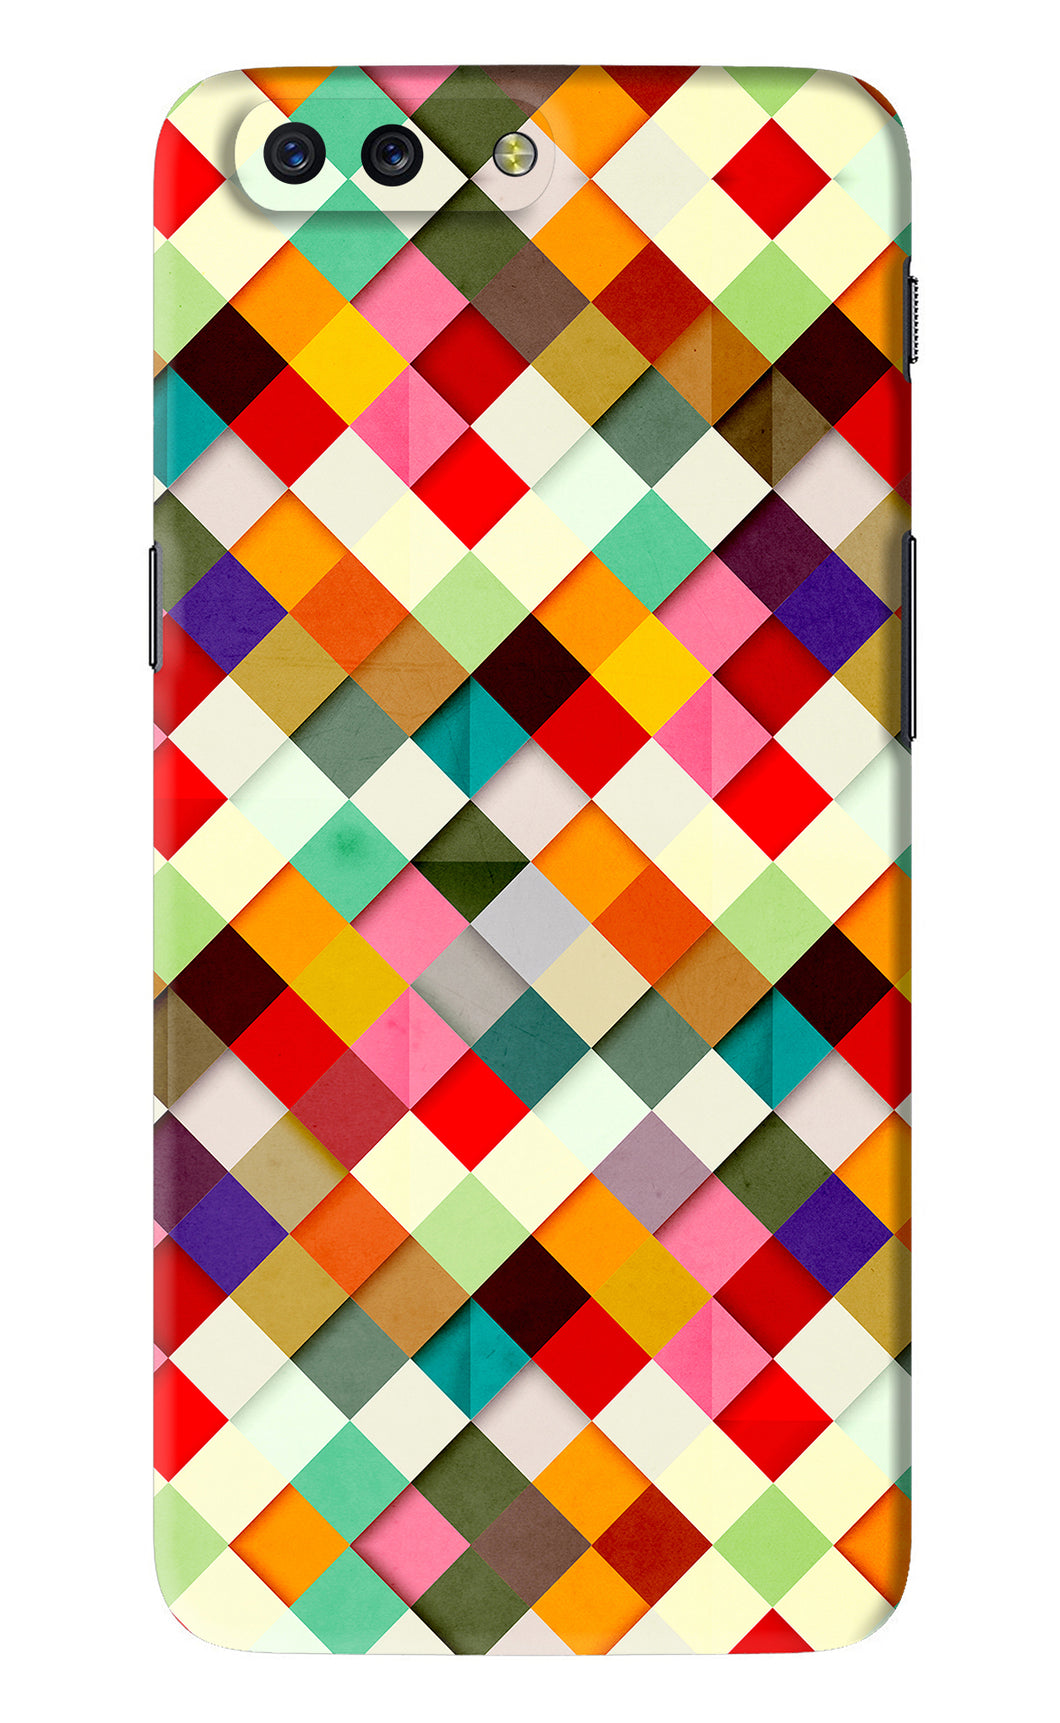 Geometric Abstract Colorful OnePlus 5 Back Skin Wrap